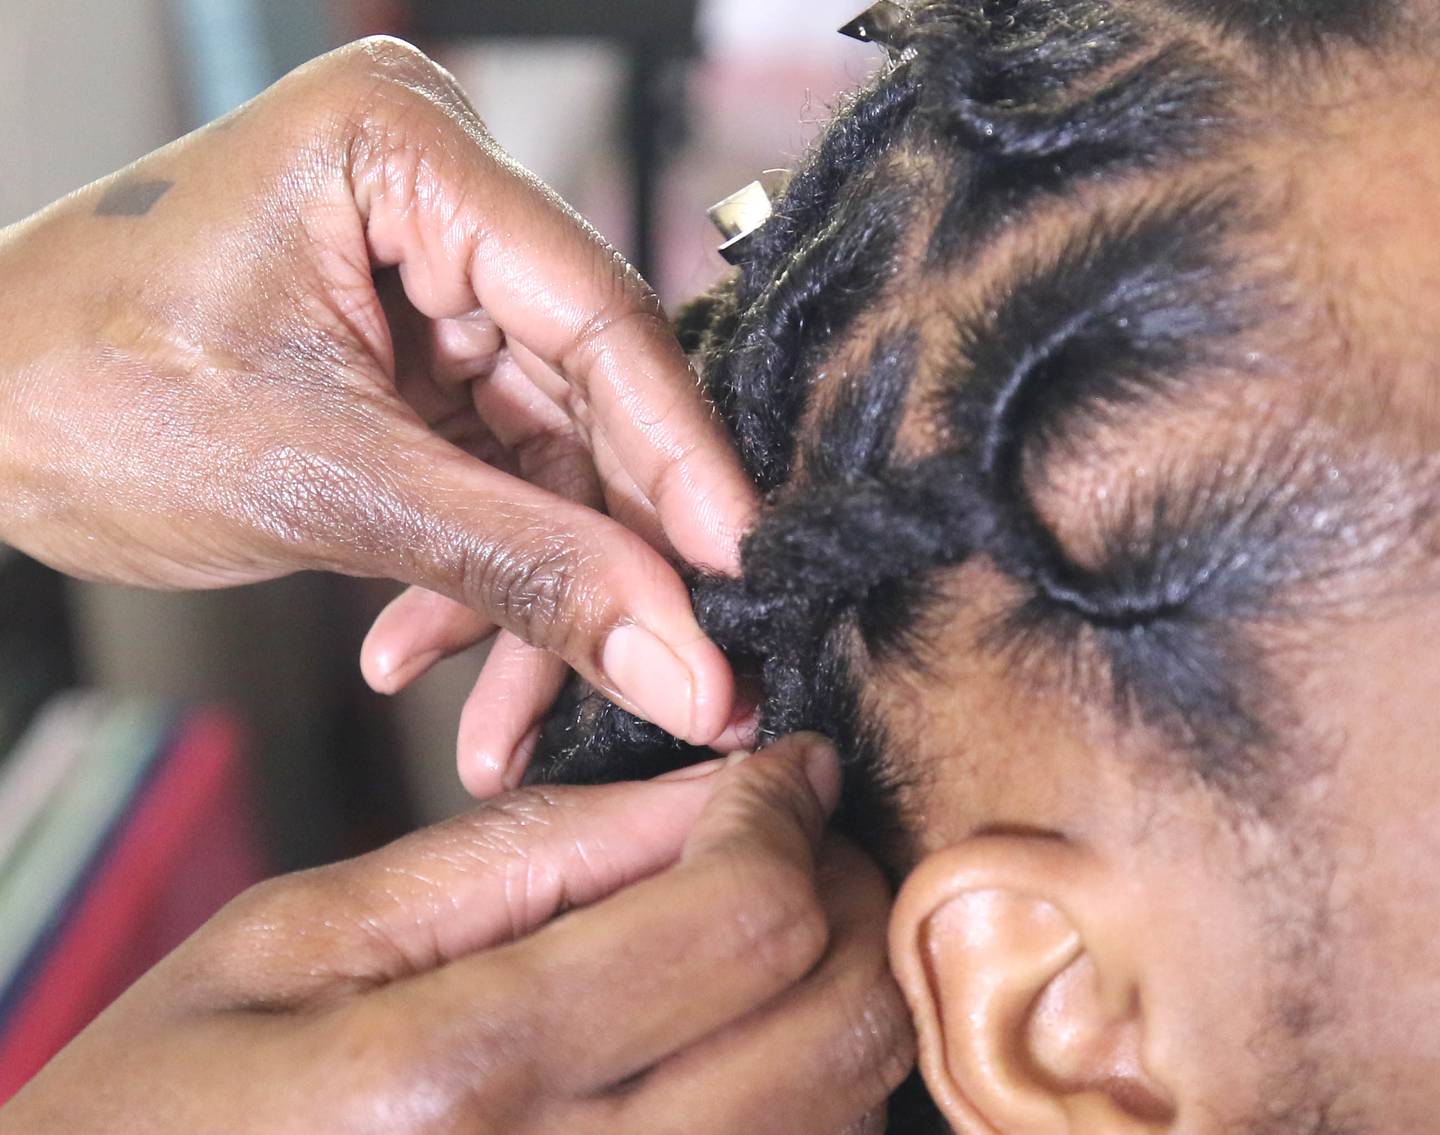 Hairstylist Mariyah Ofei braids the locks of DeKalb resident Michael Calhoun Thursday, Feb. 24, 2022, in her home studio in DeKalb.  Ofei, who plays sports herself, specializes in working with others who also have locks.